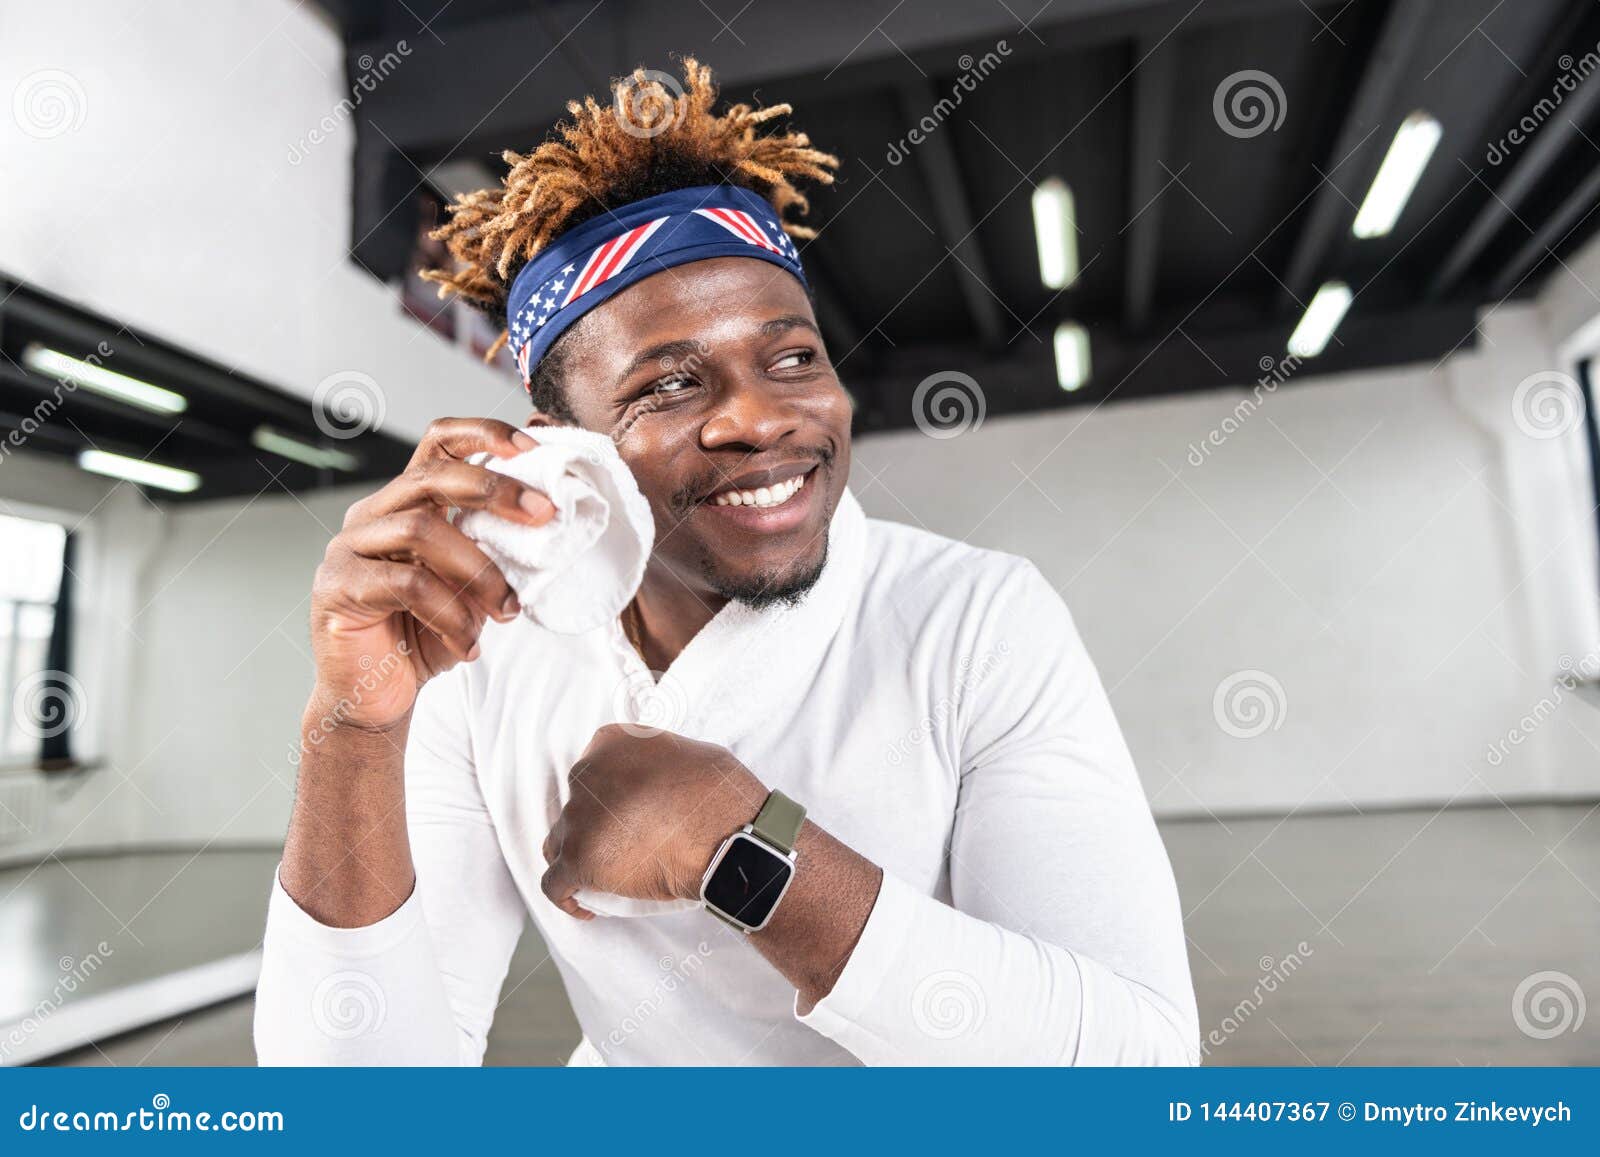 Cheerful Positive Young Guy With Short Dreadlocks Carrying